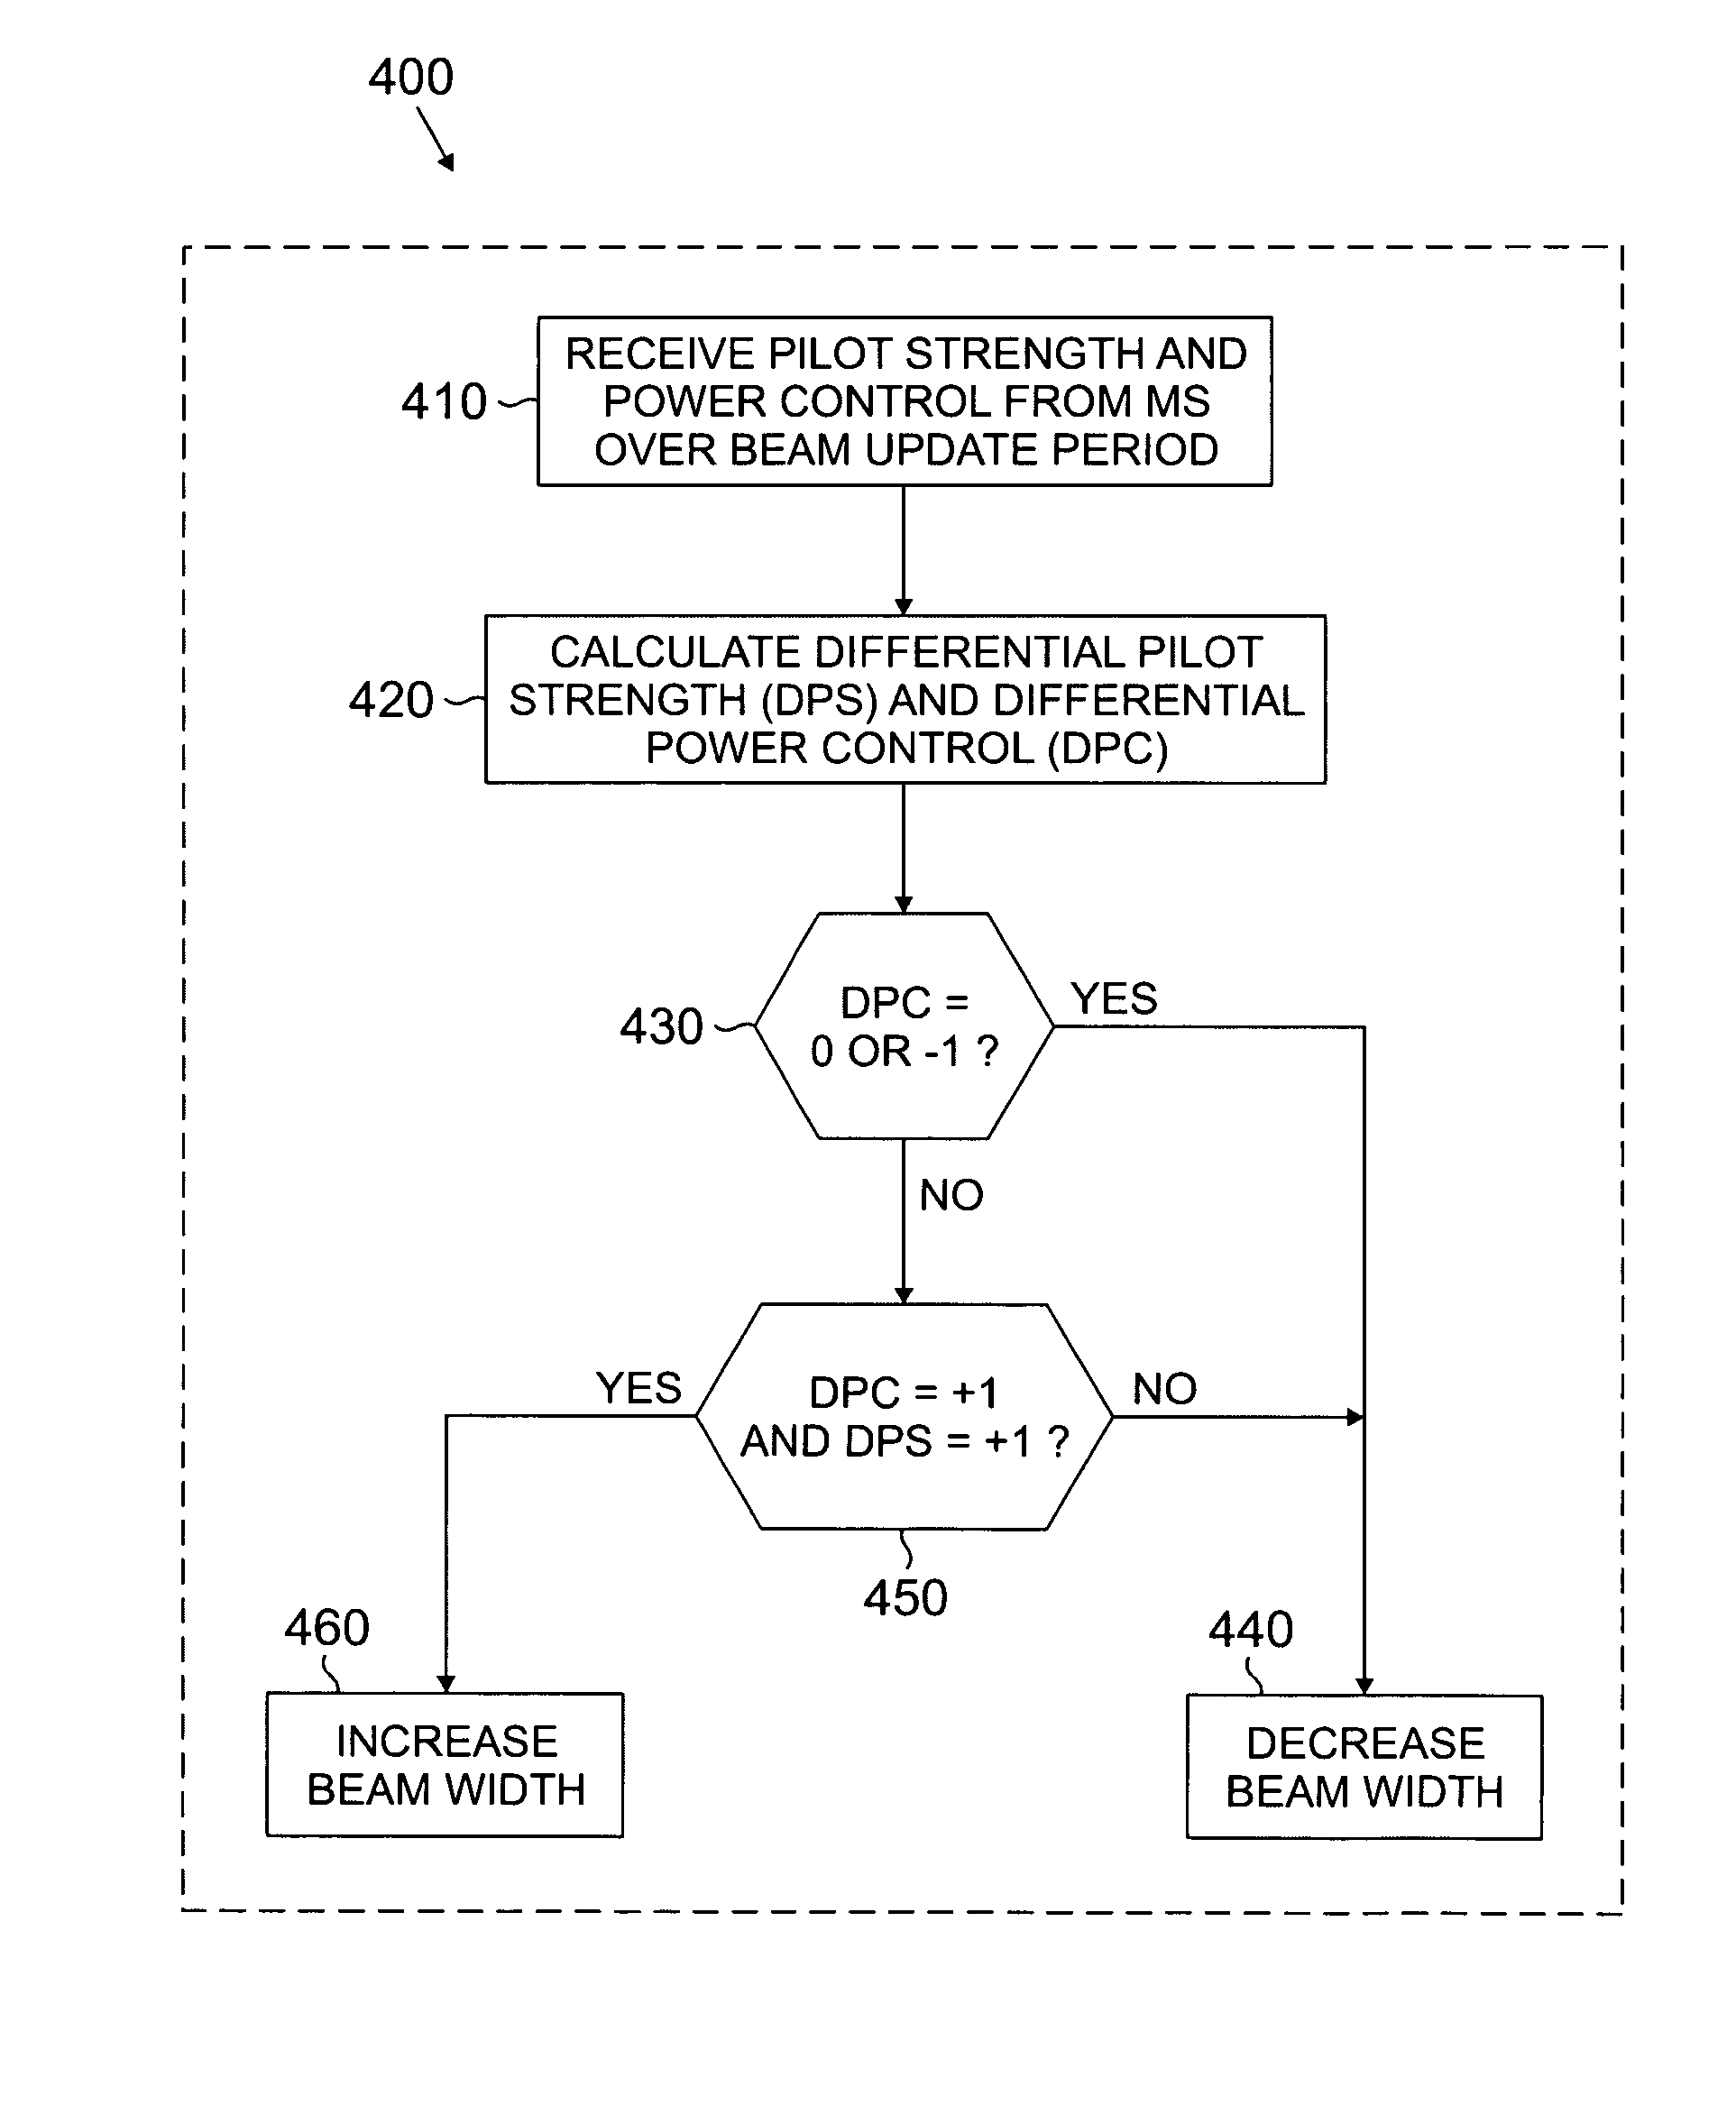 Apparatus and method for dynamic control of downlink beam width of an adaptive antenna array in a wireless network